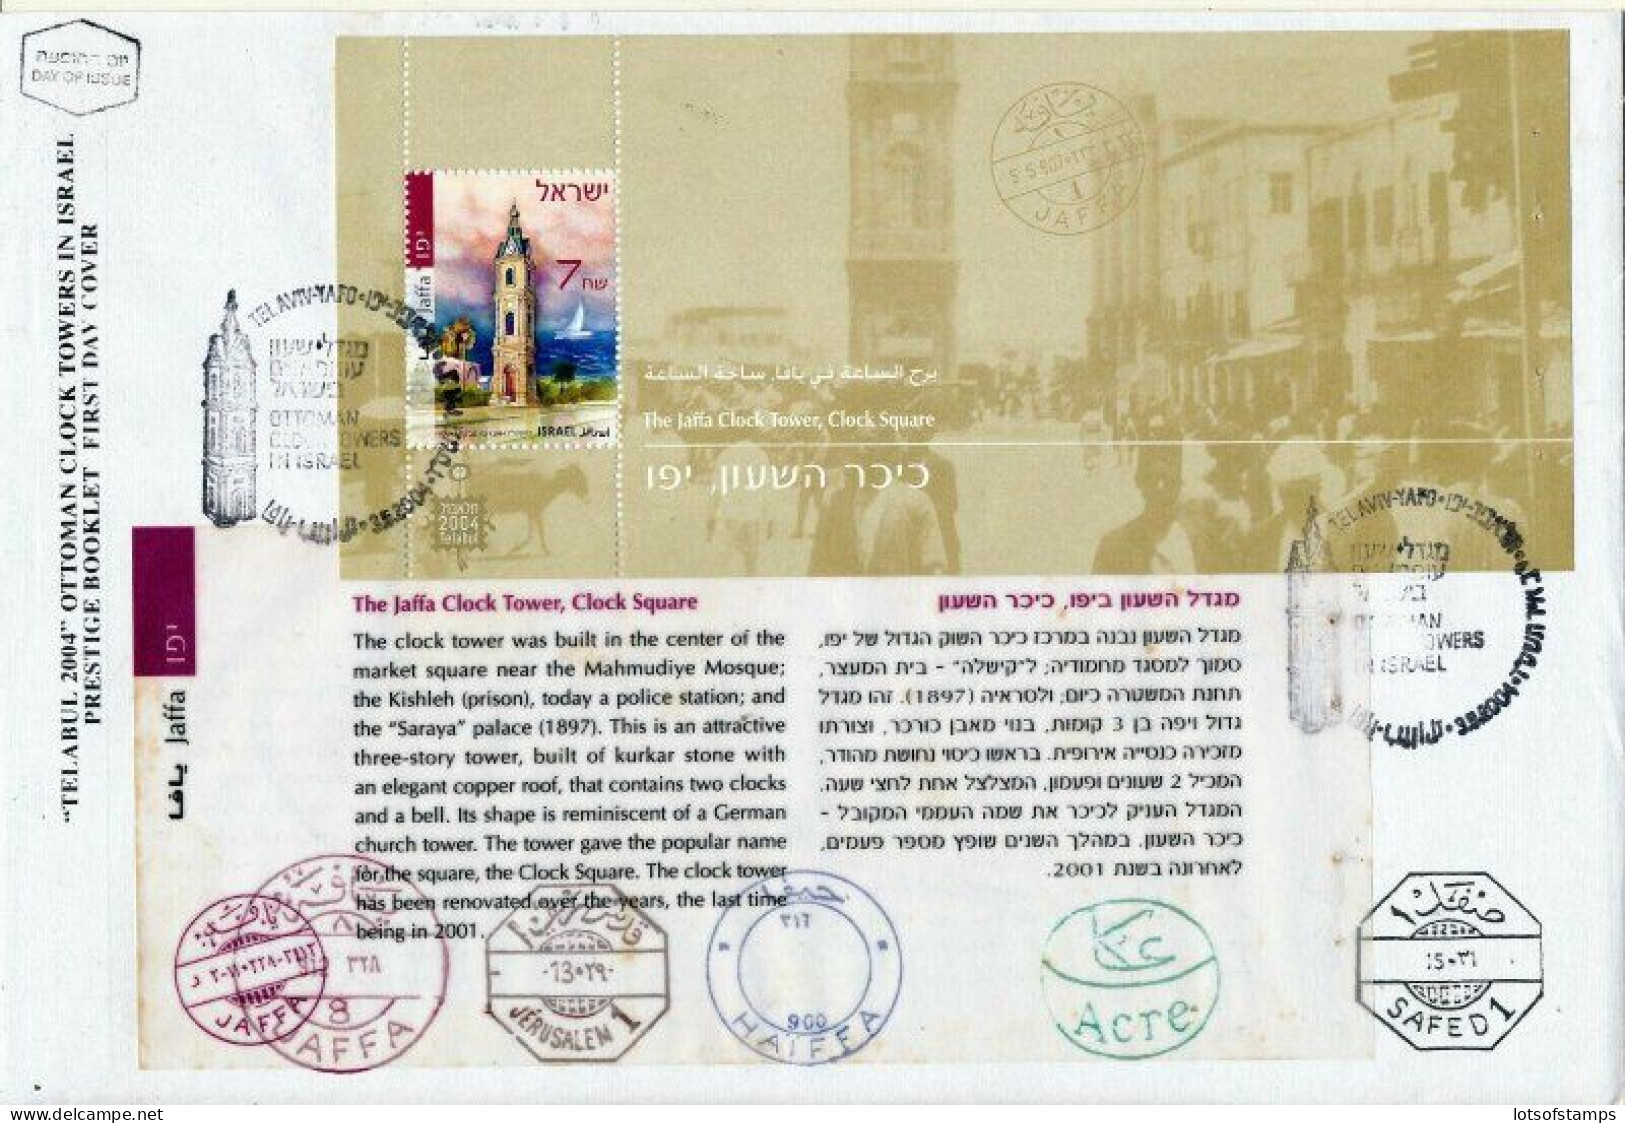 ISRAEL 2004 ANCIENT CLOCK TOWERS BOOKLET S/SHEETS SET OF 6 FDC's SEE 6 SCANS - Covers & Documents